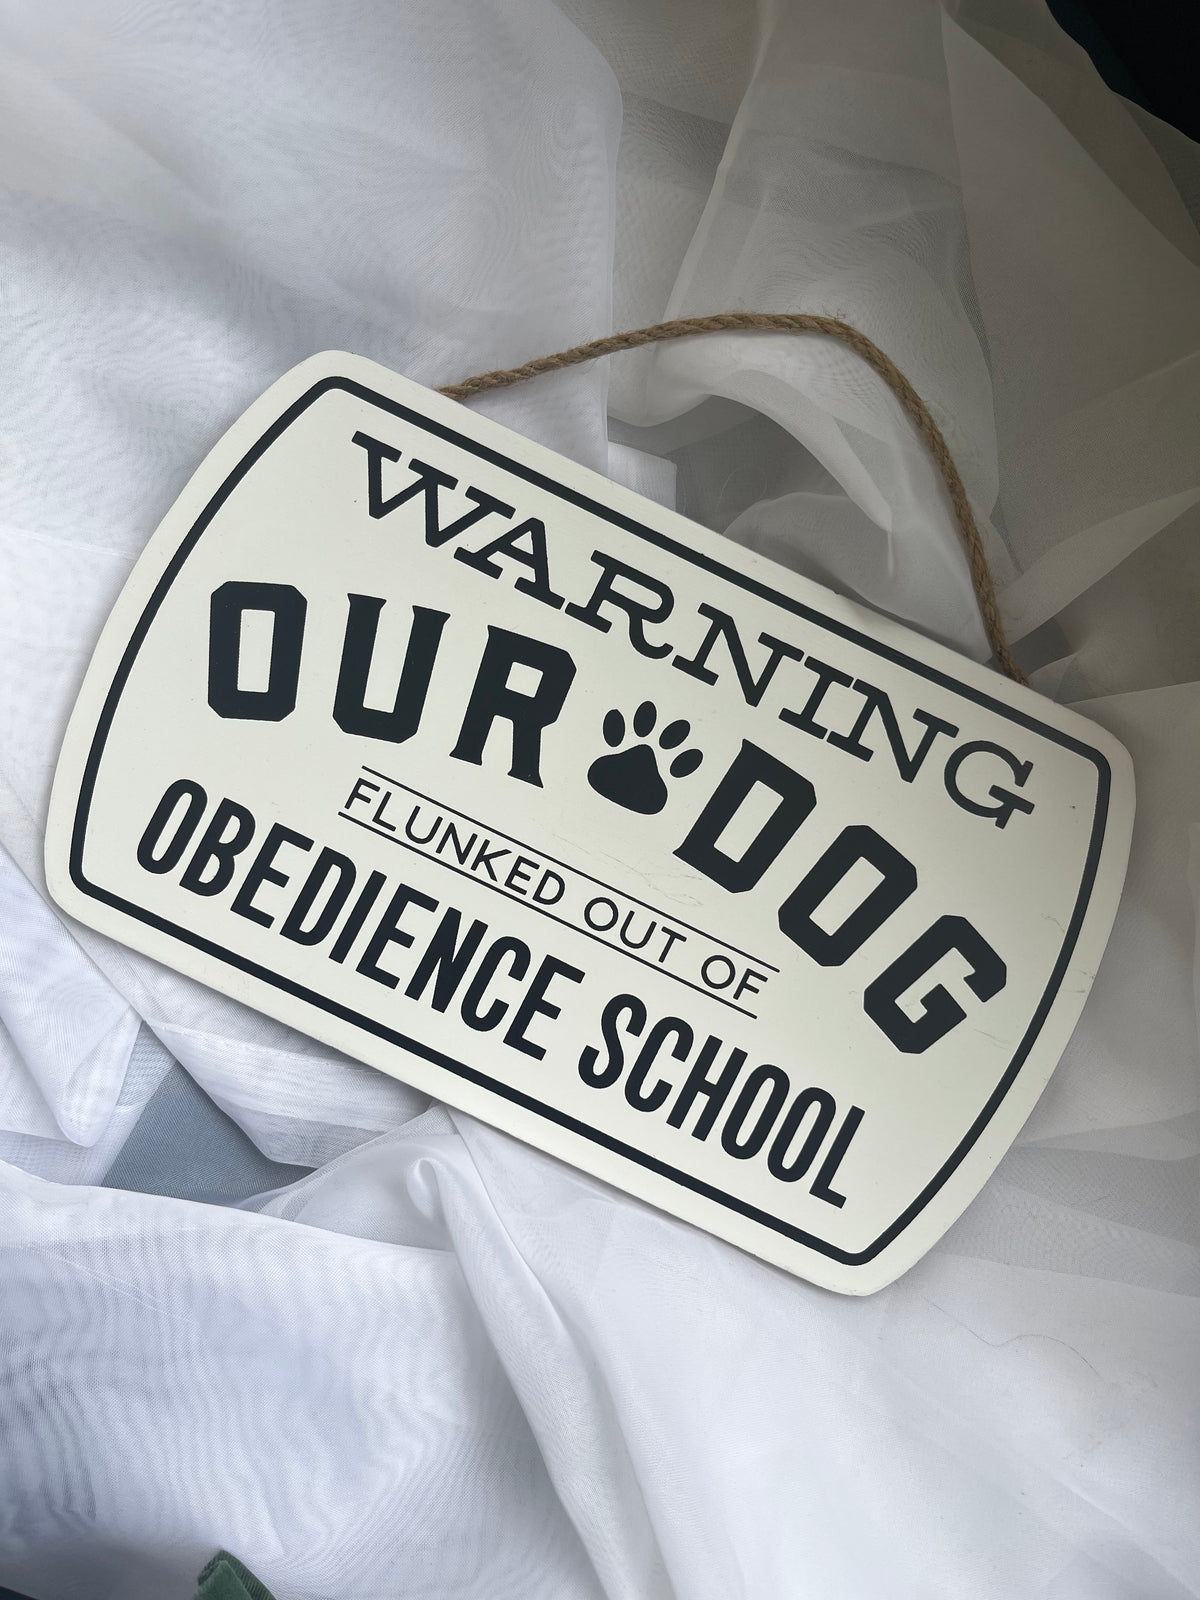 Our Dog Flunked Obedience School Sign